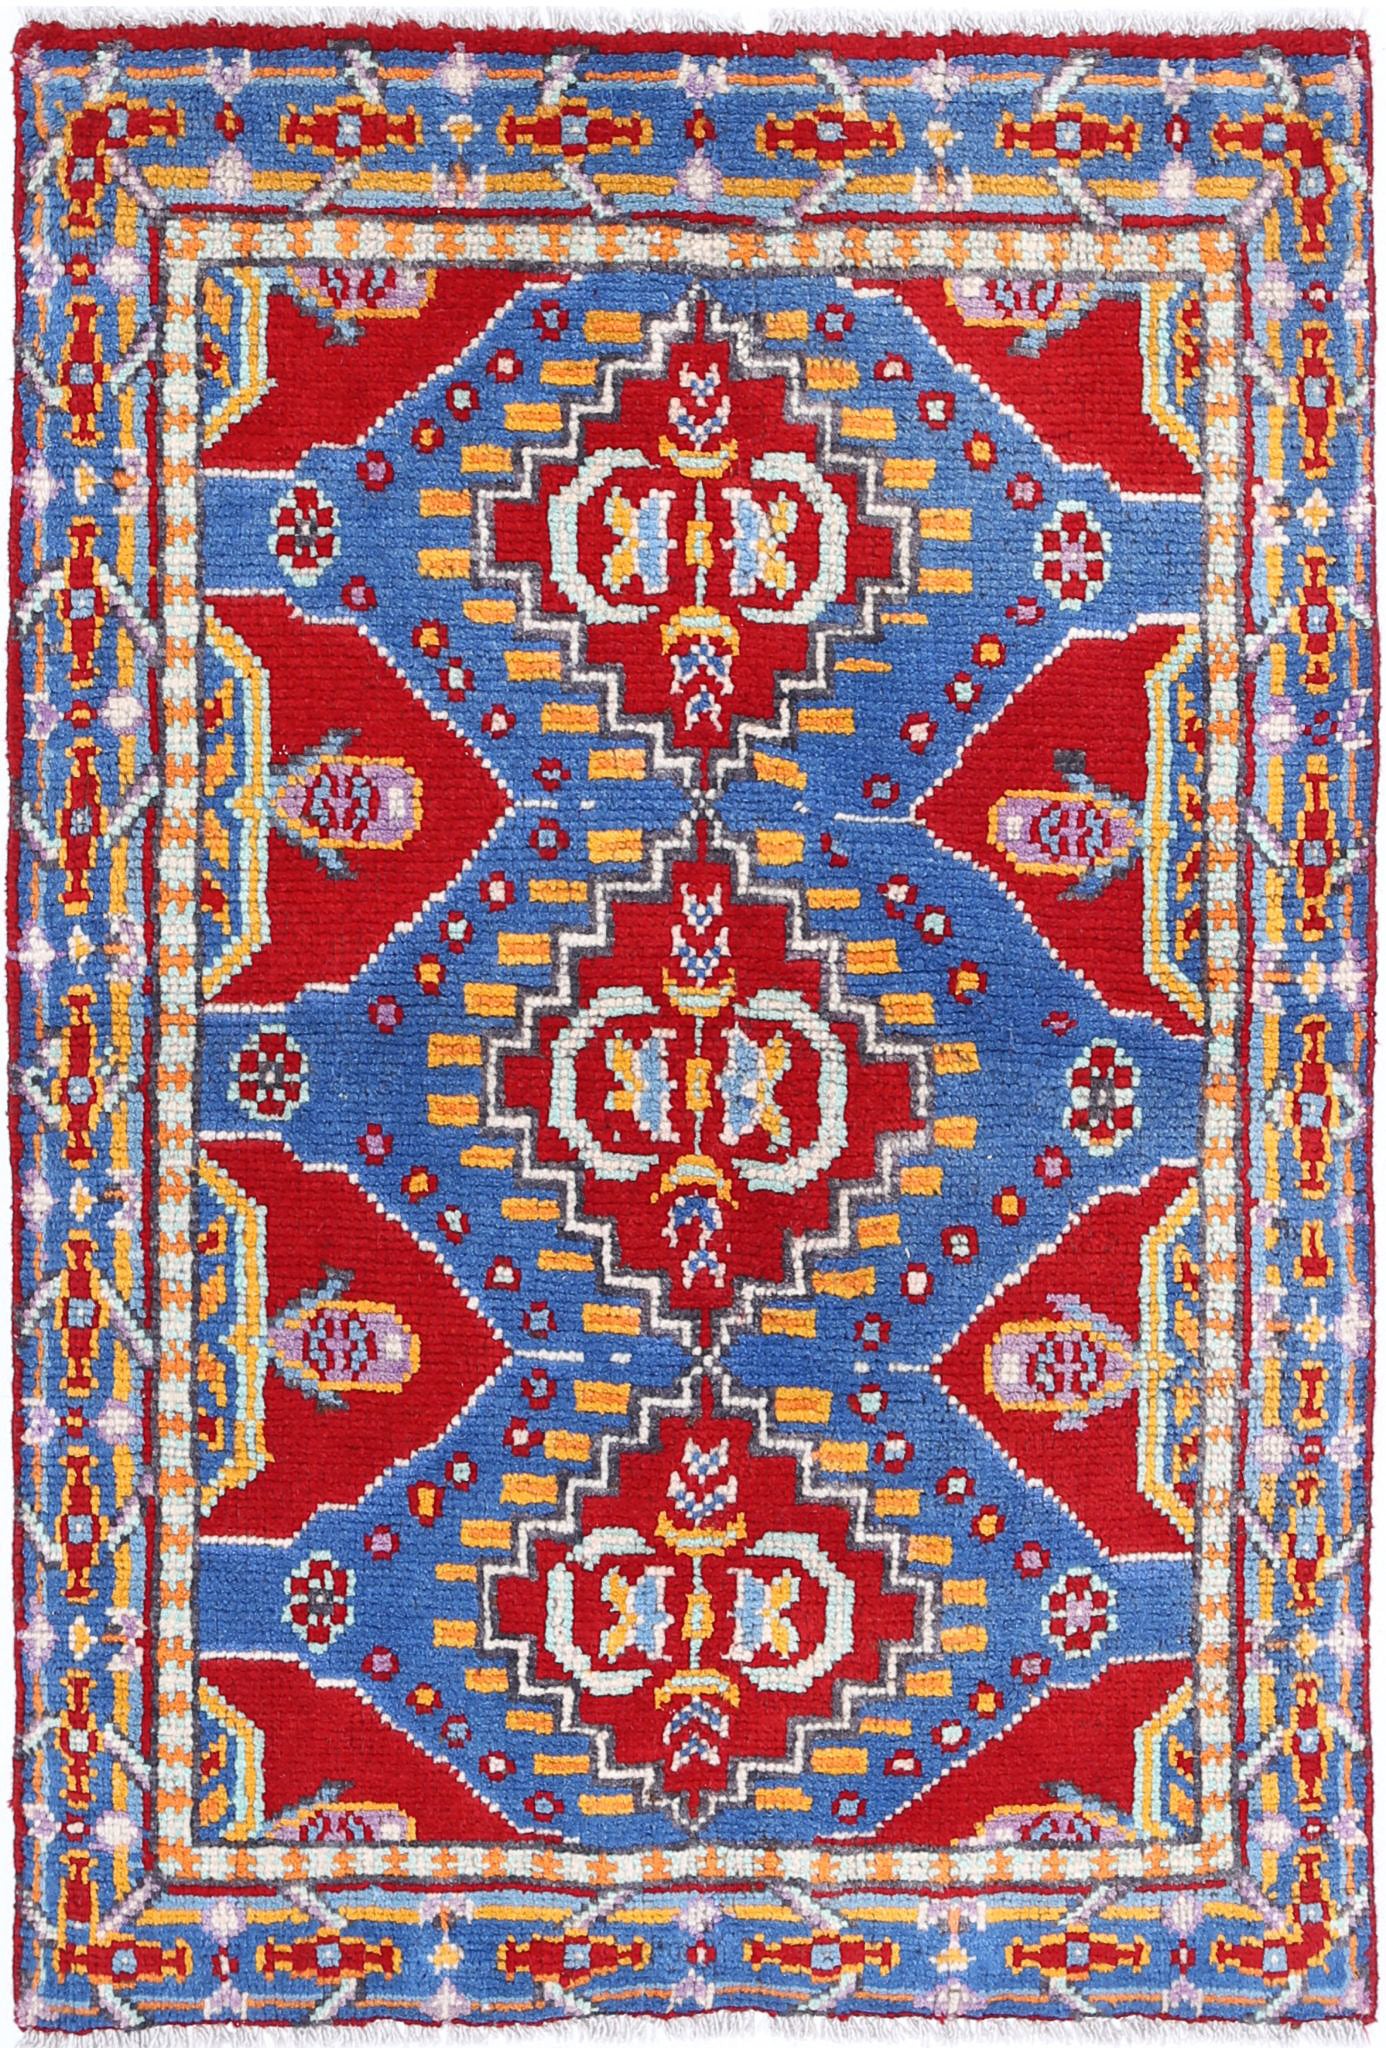 Revival-hand-knotted-qarghani-wool-rug-5014187.jpg